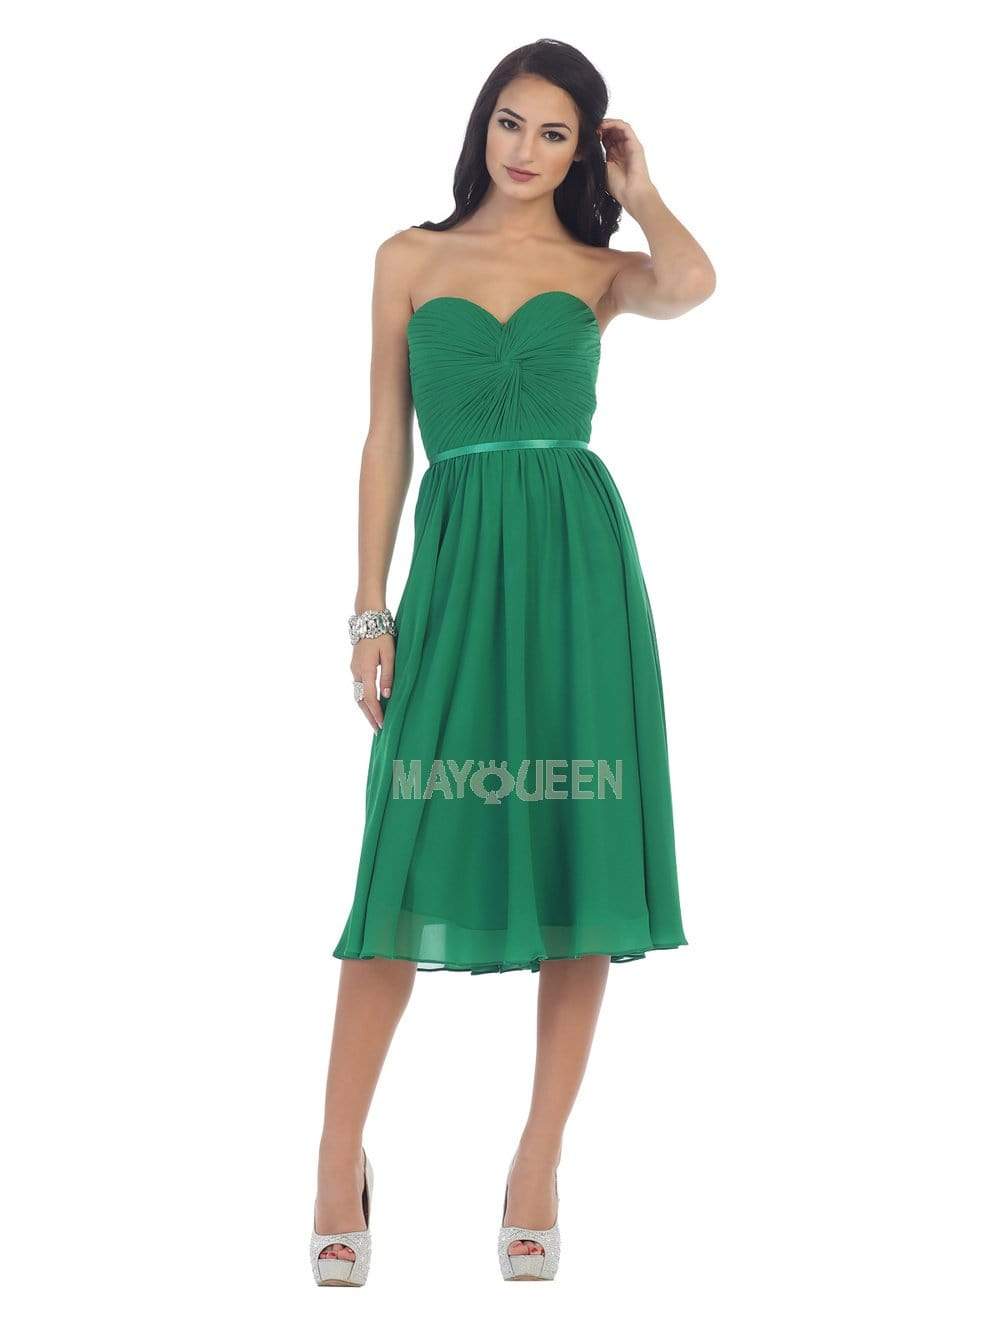 May Queen - MQ1161 Strapless Sweetheart Neckline Twisted Front Dress Wedding Guest 4 / Emerald Gr